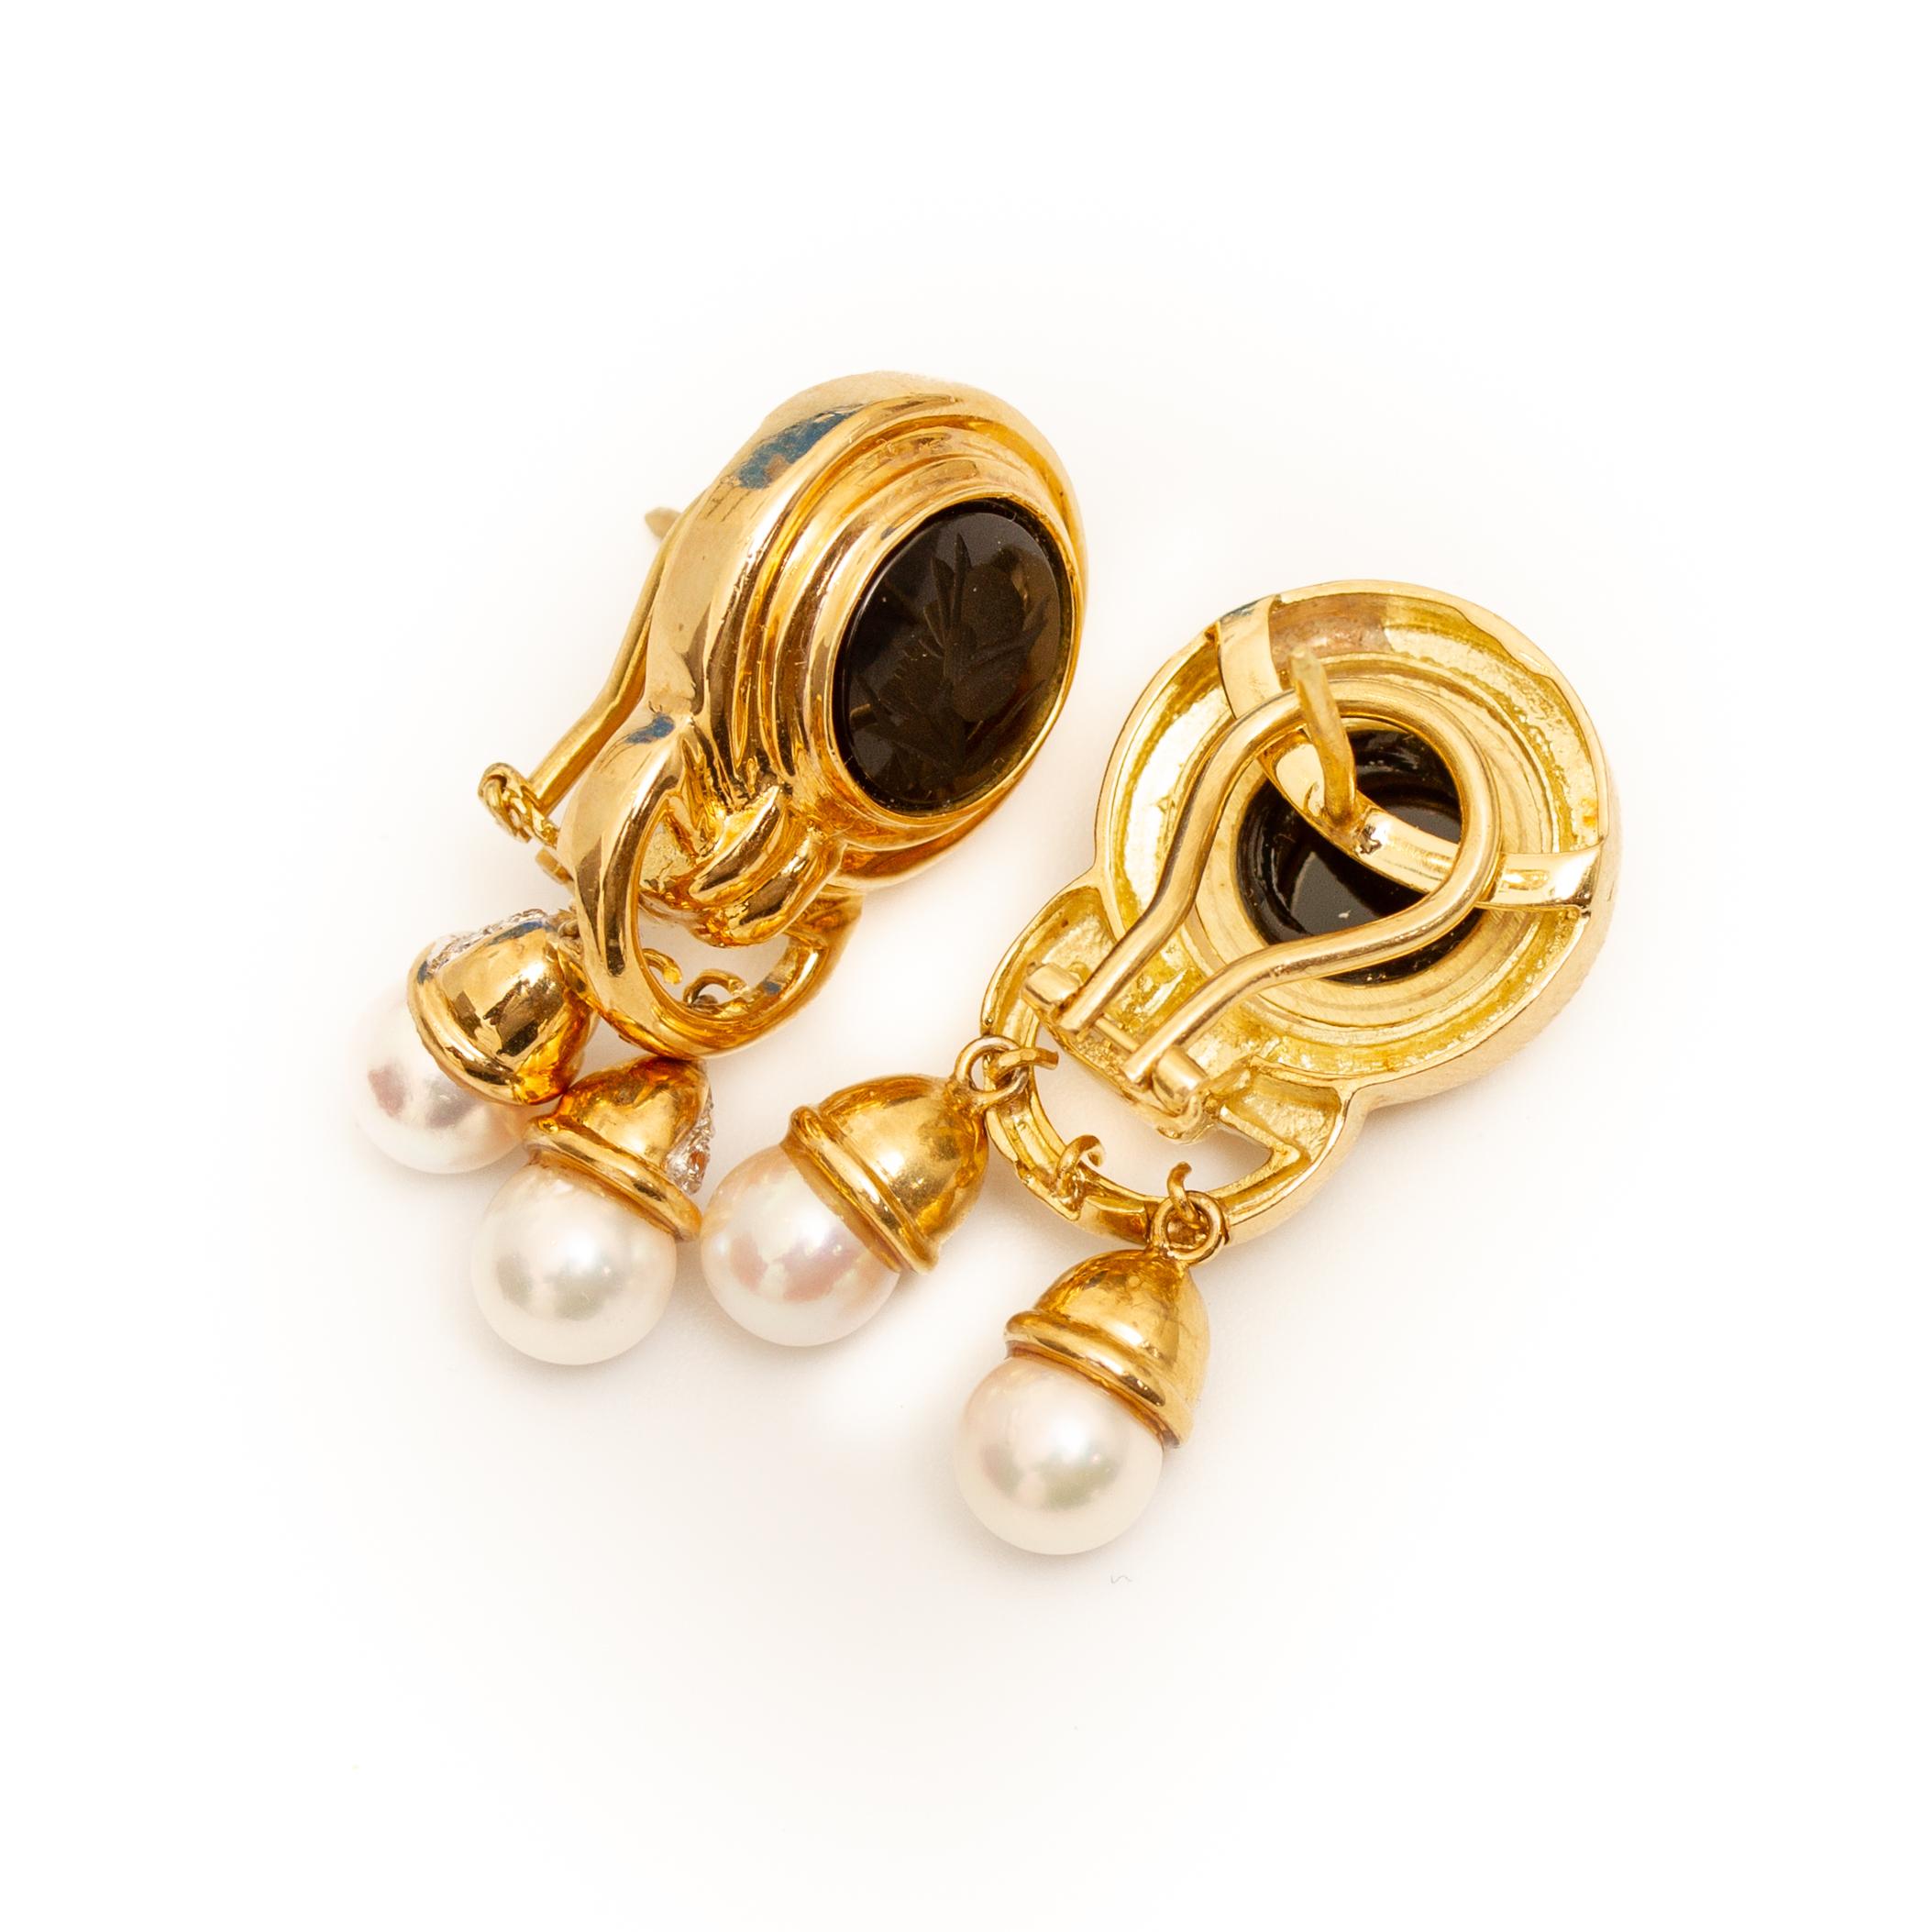 Offered is a pair of 14K Yellow Gold Cultured Pearl, Diamond and Black Onyx Intaglio Earrings